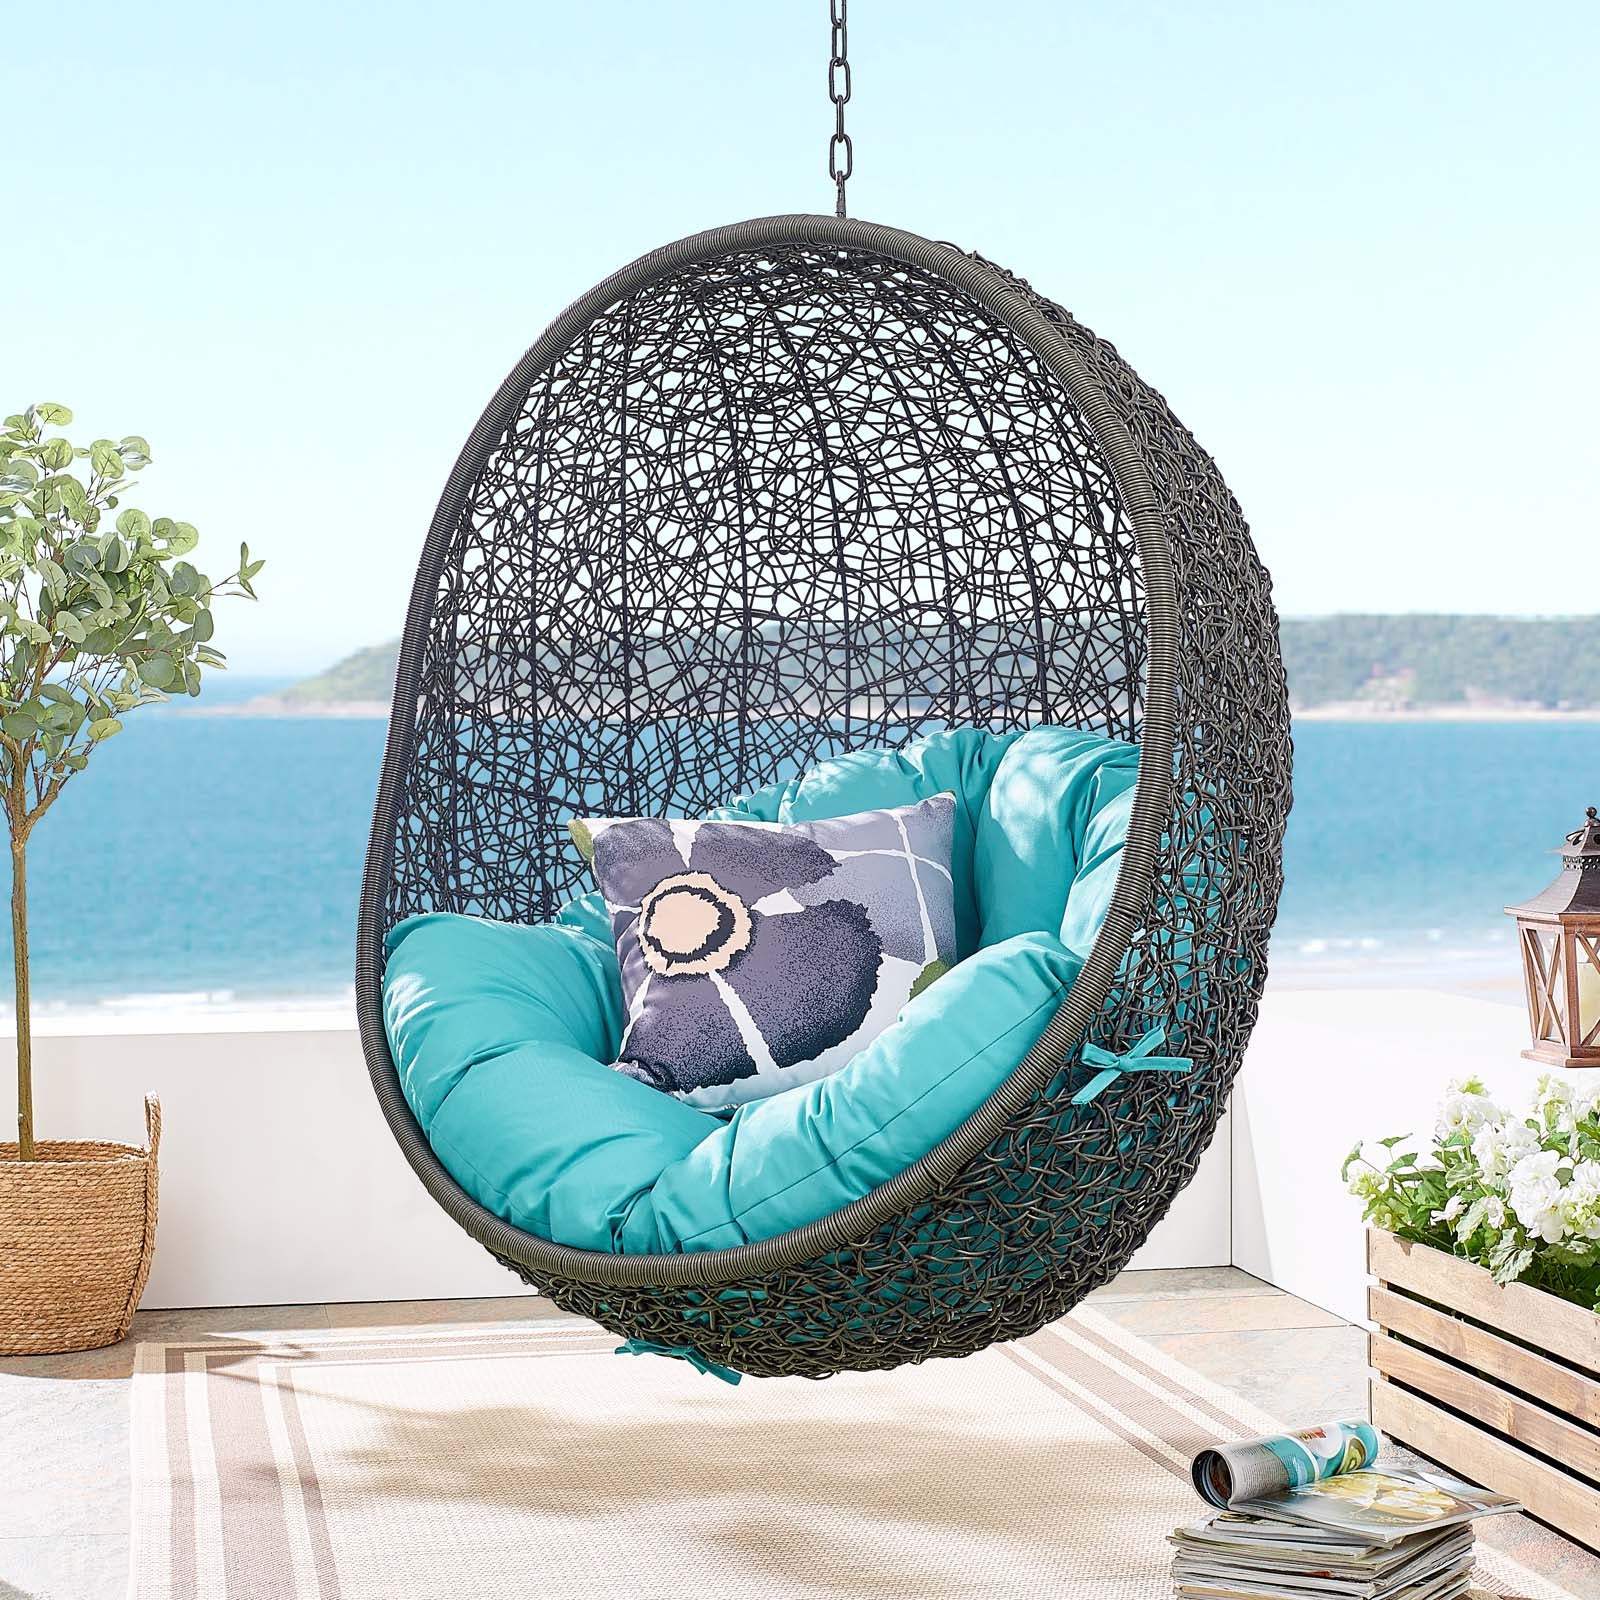 Modway Outdoor Swings - Hide Outdoor Patio Swing Chair With Stand Gray Turquoise